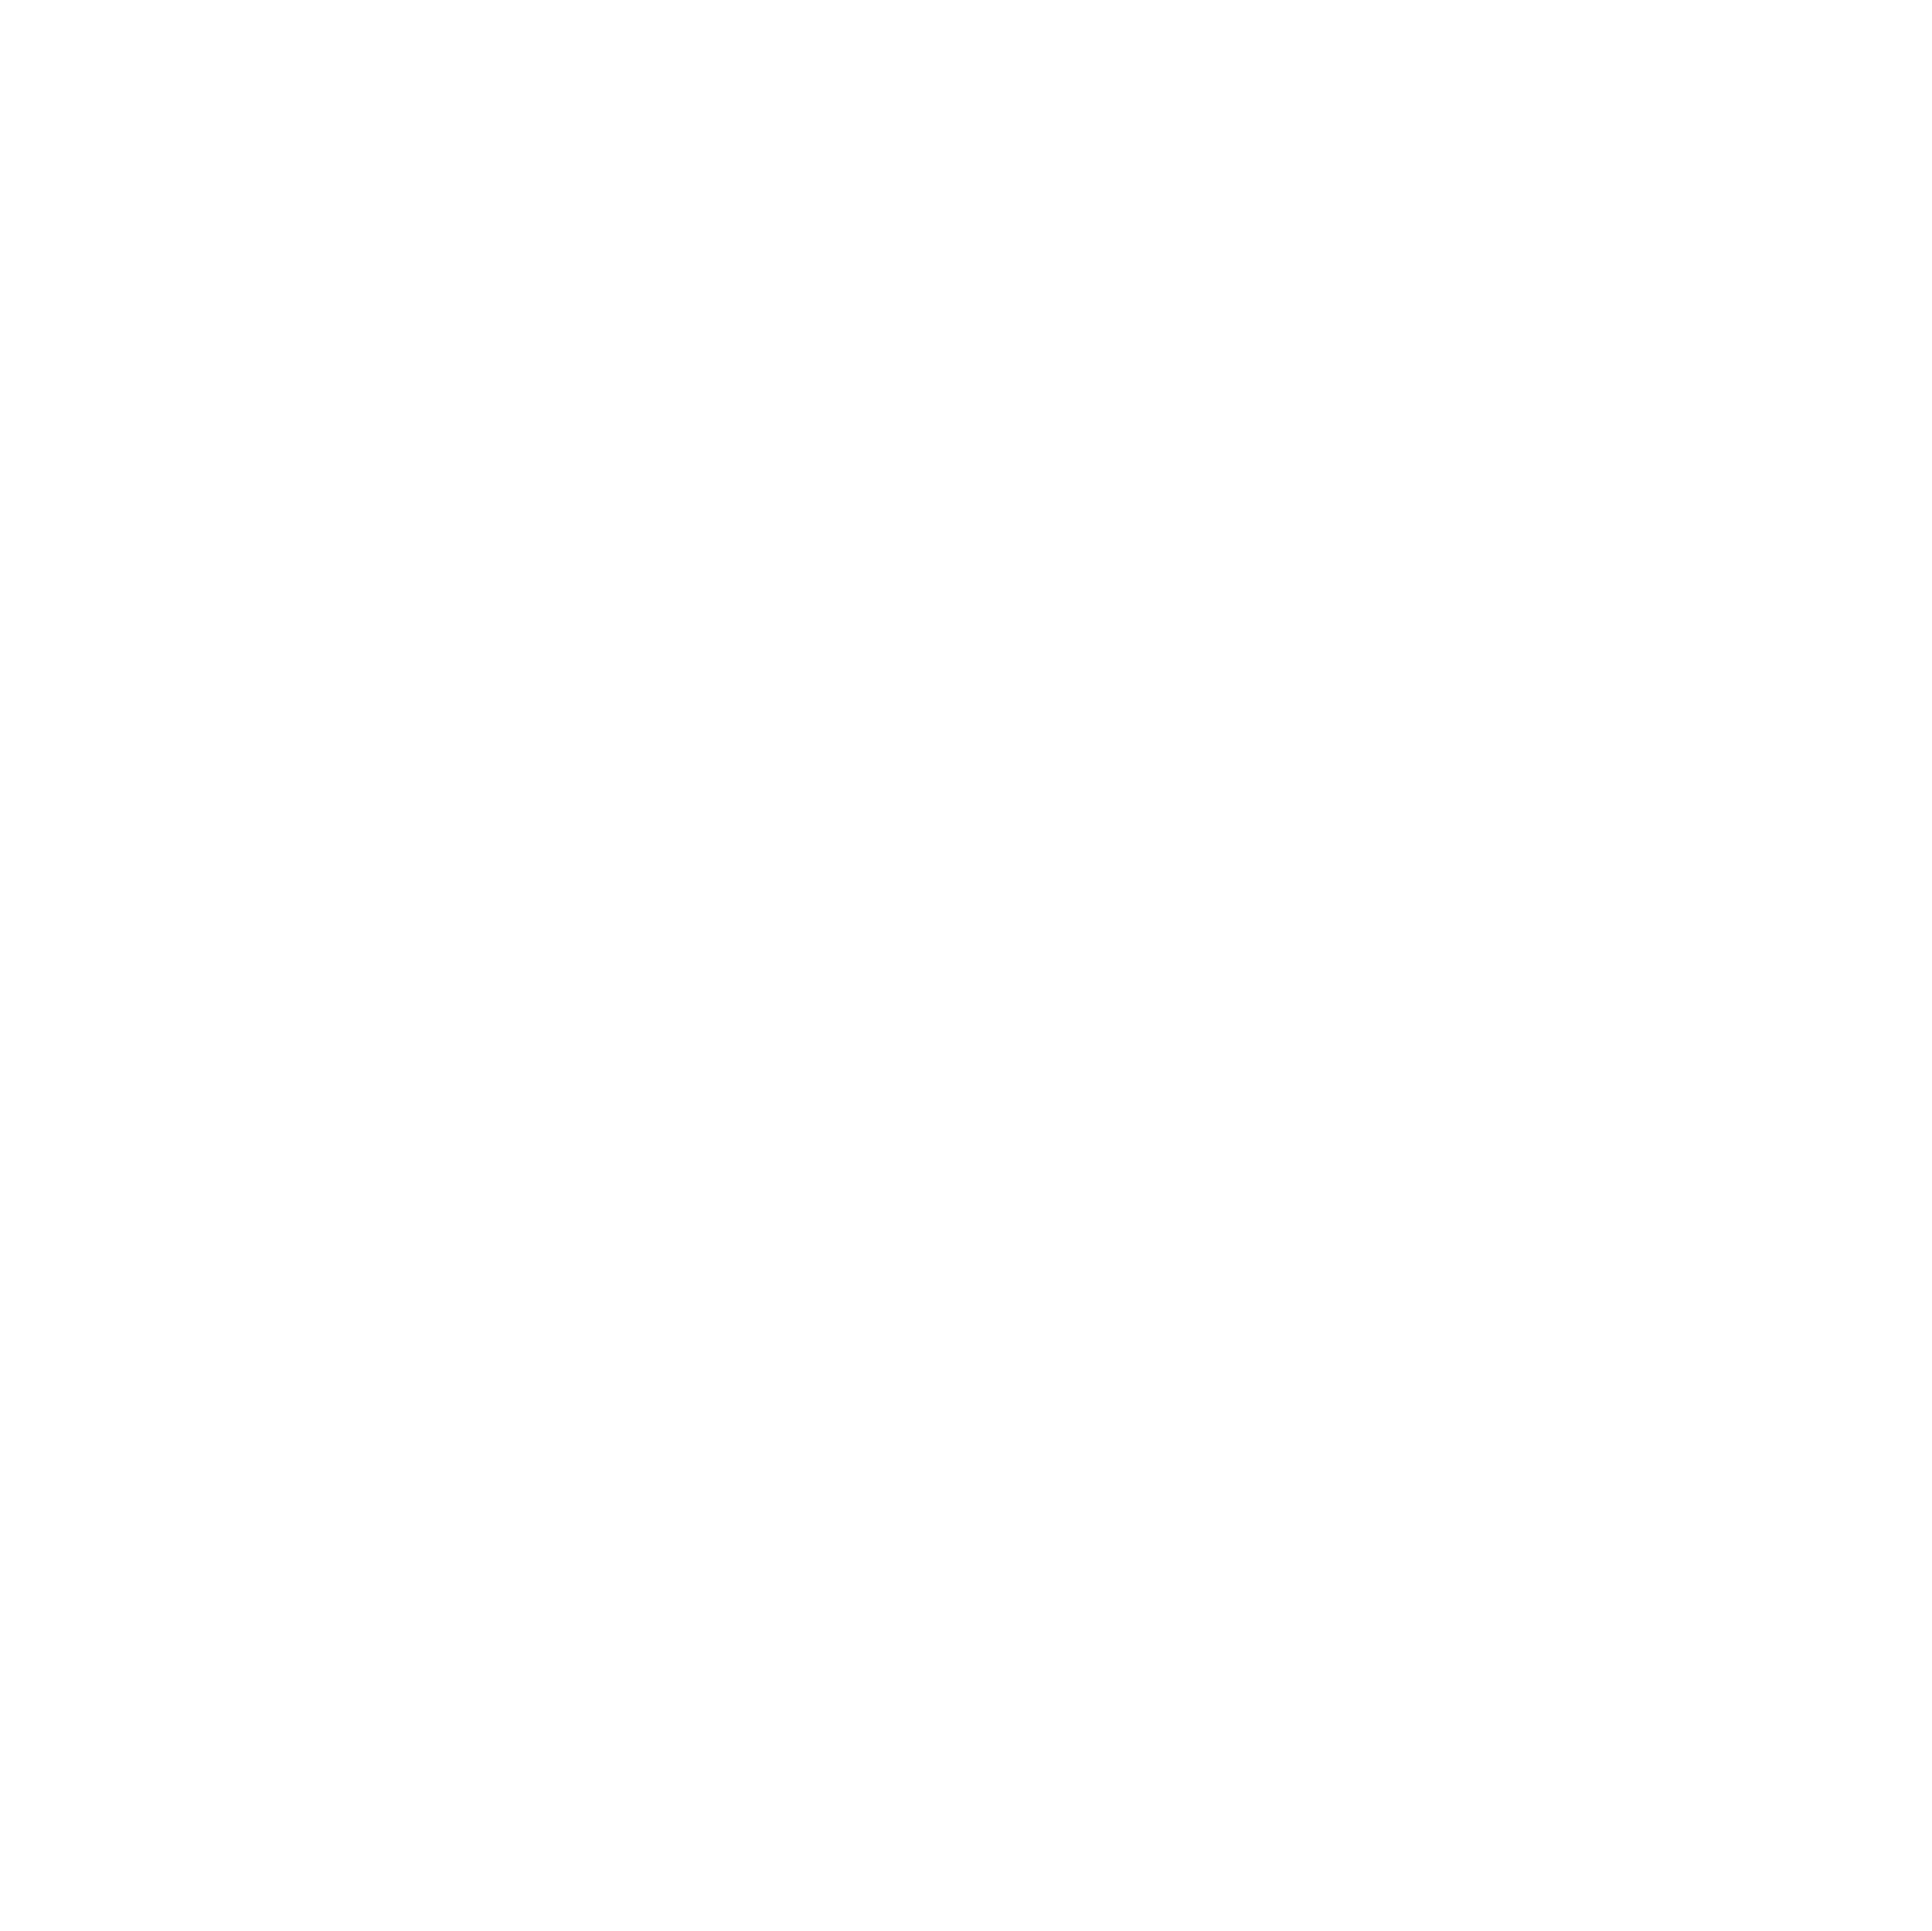 Link to Pembrokeshire College's Instagram page